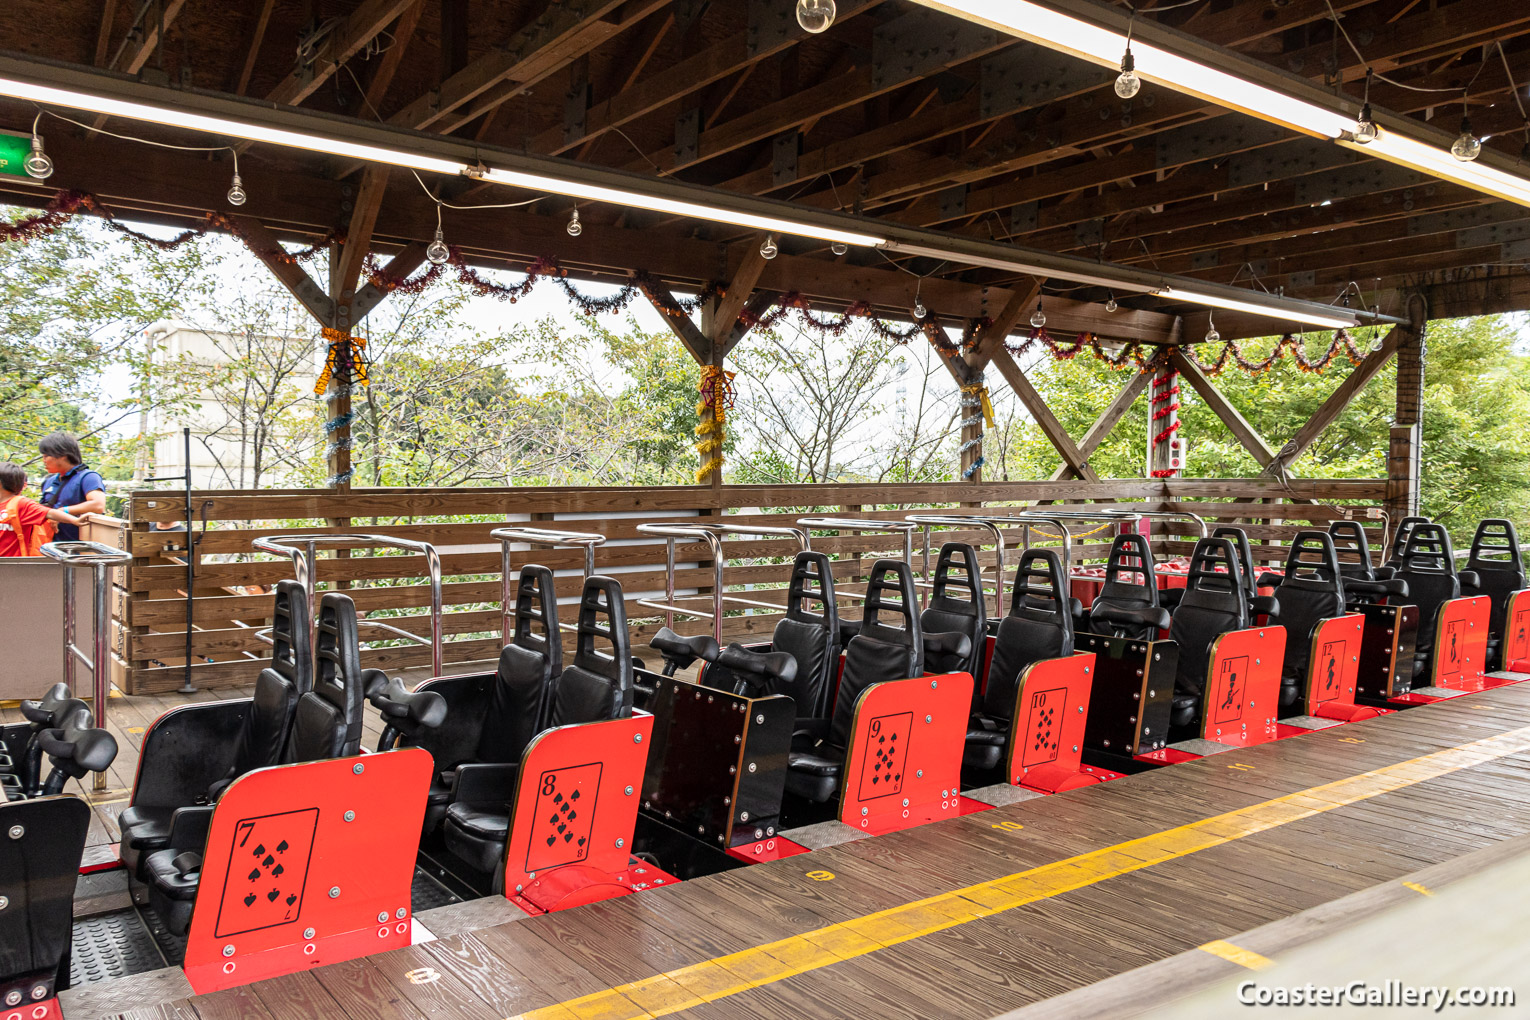 Trains and cards on the Regina roller coaster at the Tobu Zoo in Japan